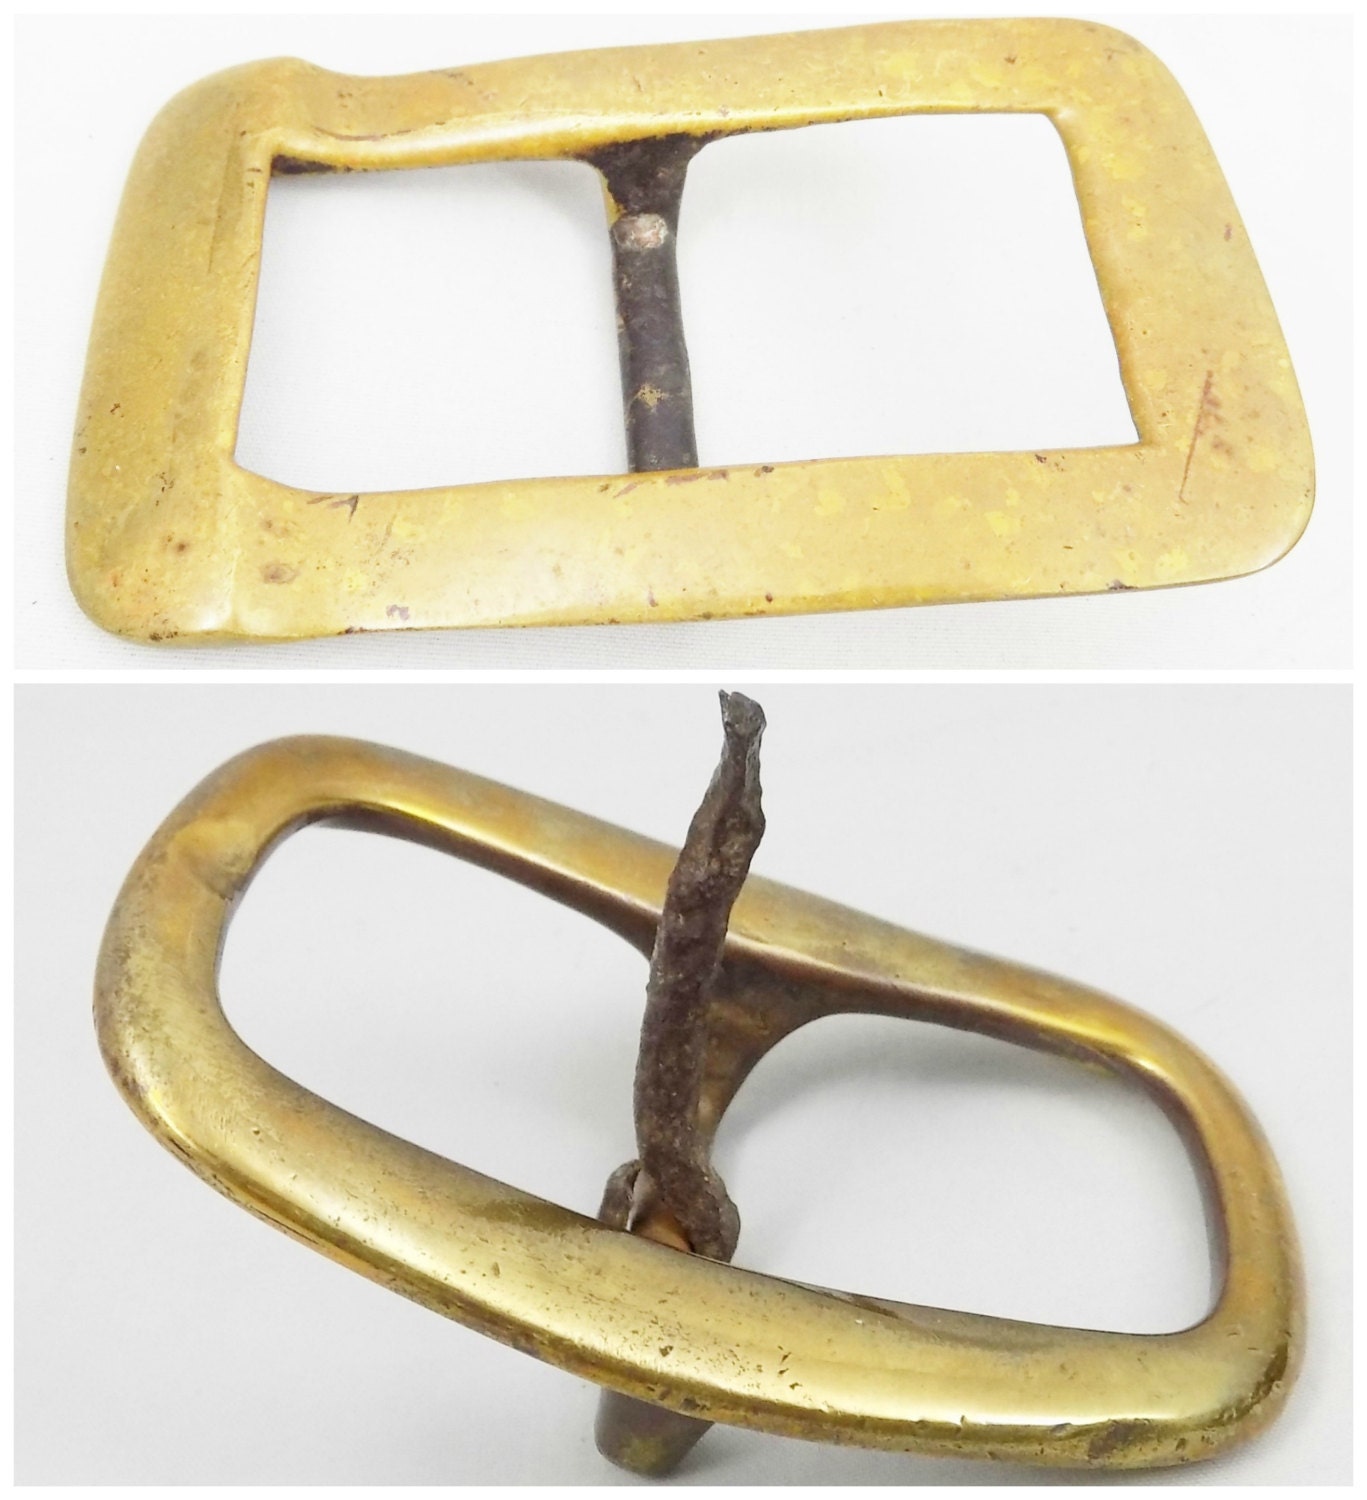 Brass Horse Tack Buckles, Horse or Mule Tack, Heavy Large Buckles from ...